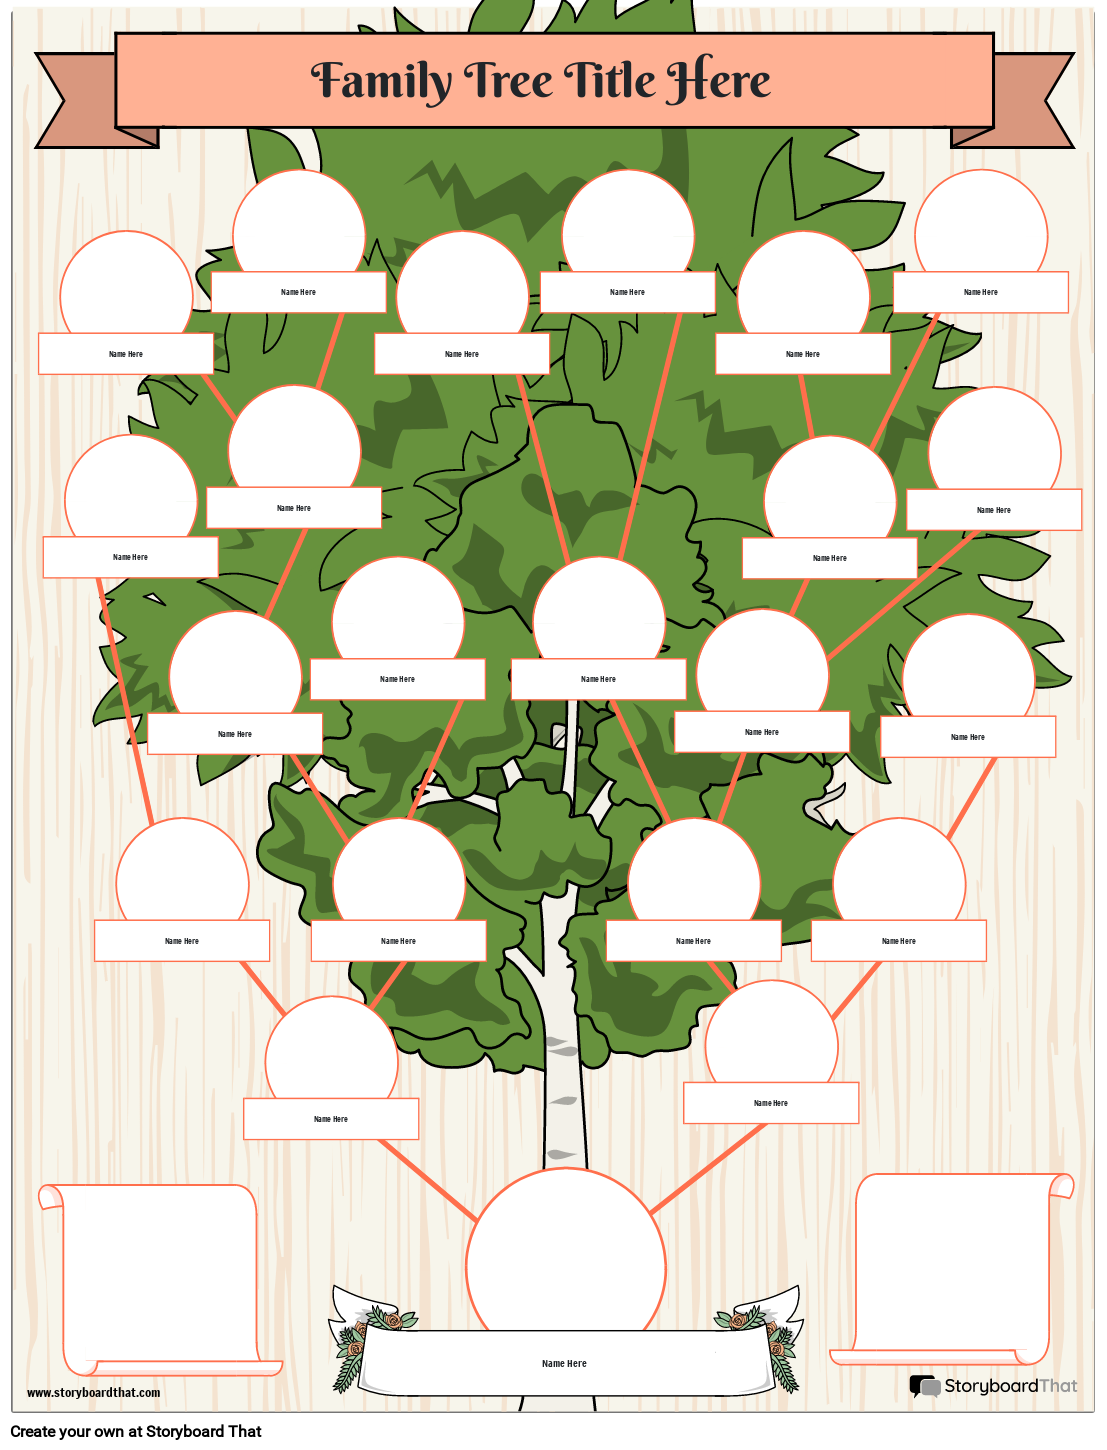 Free Family Tree Maker Examples And Templates Online - Family Tree Maker Online Free Printable